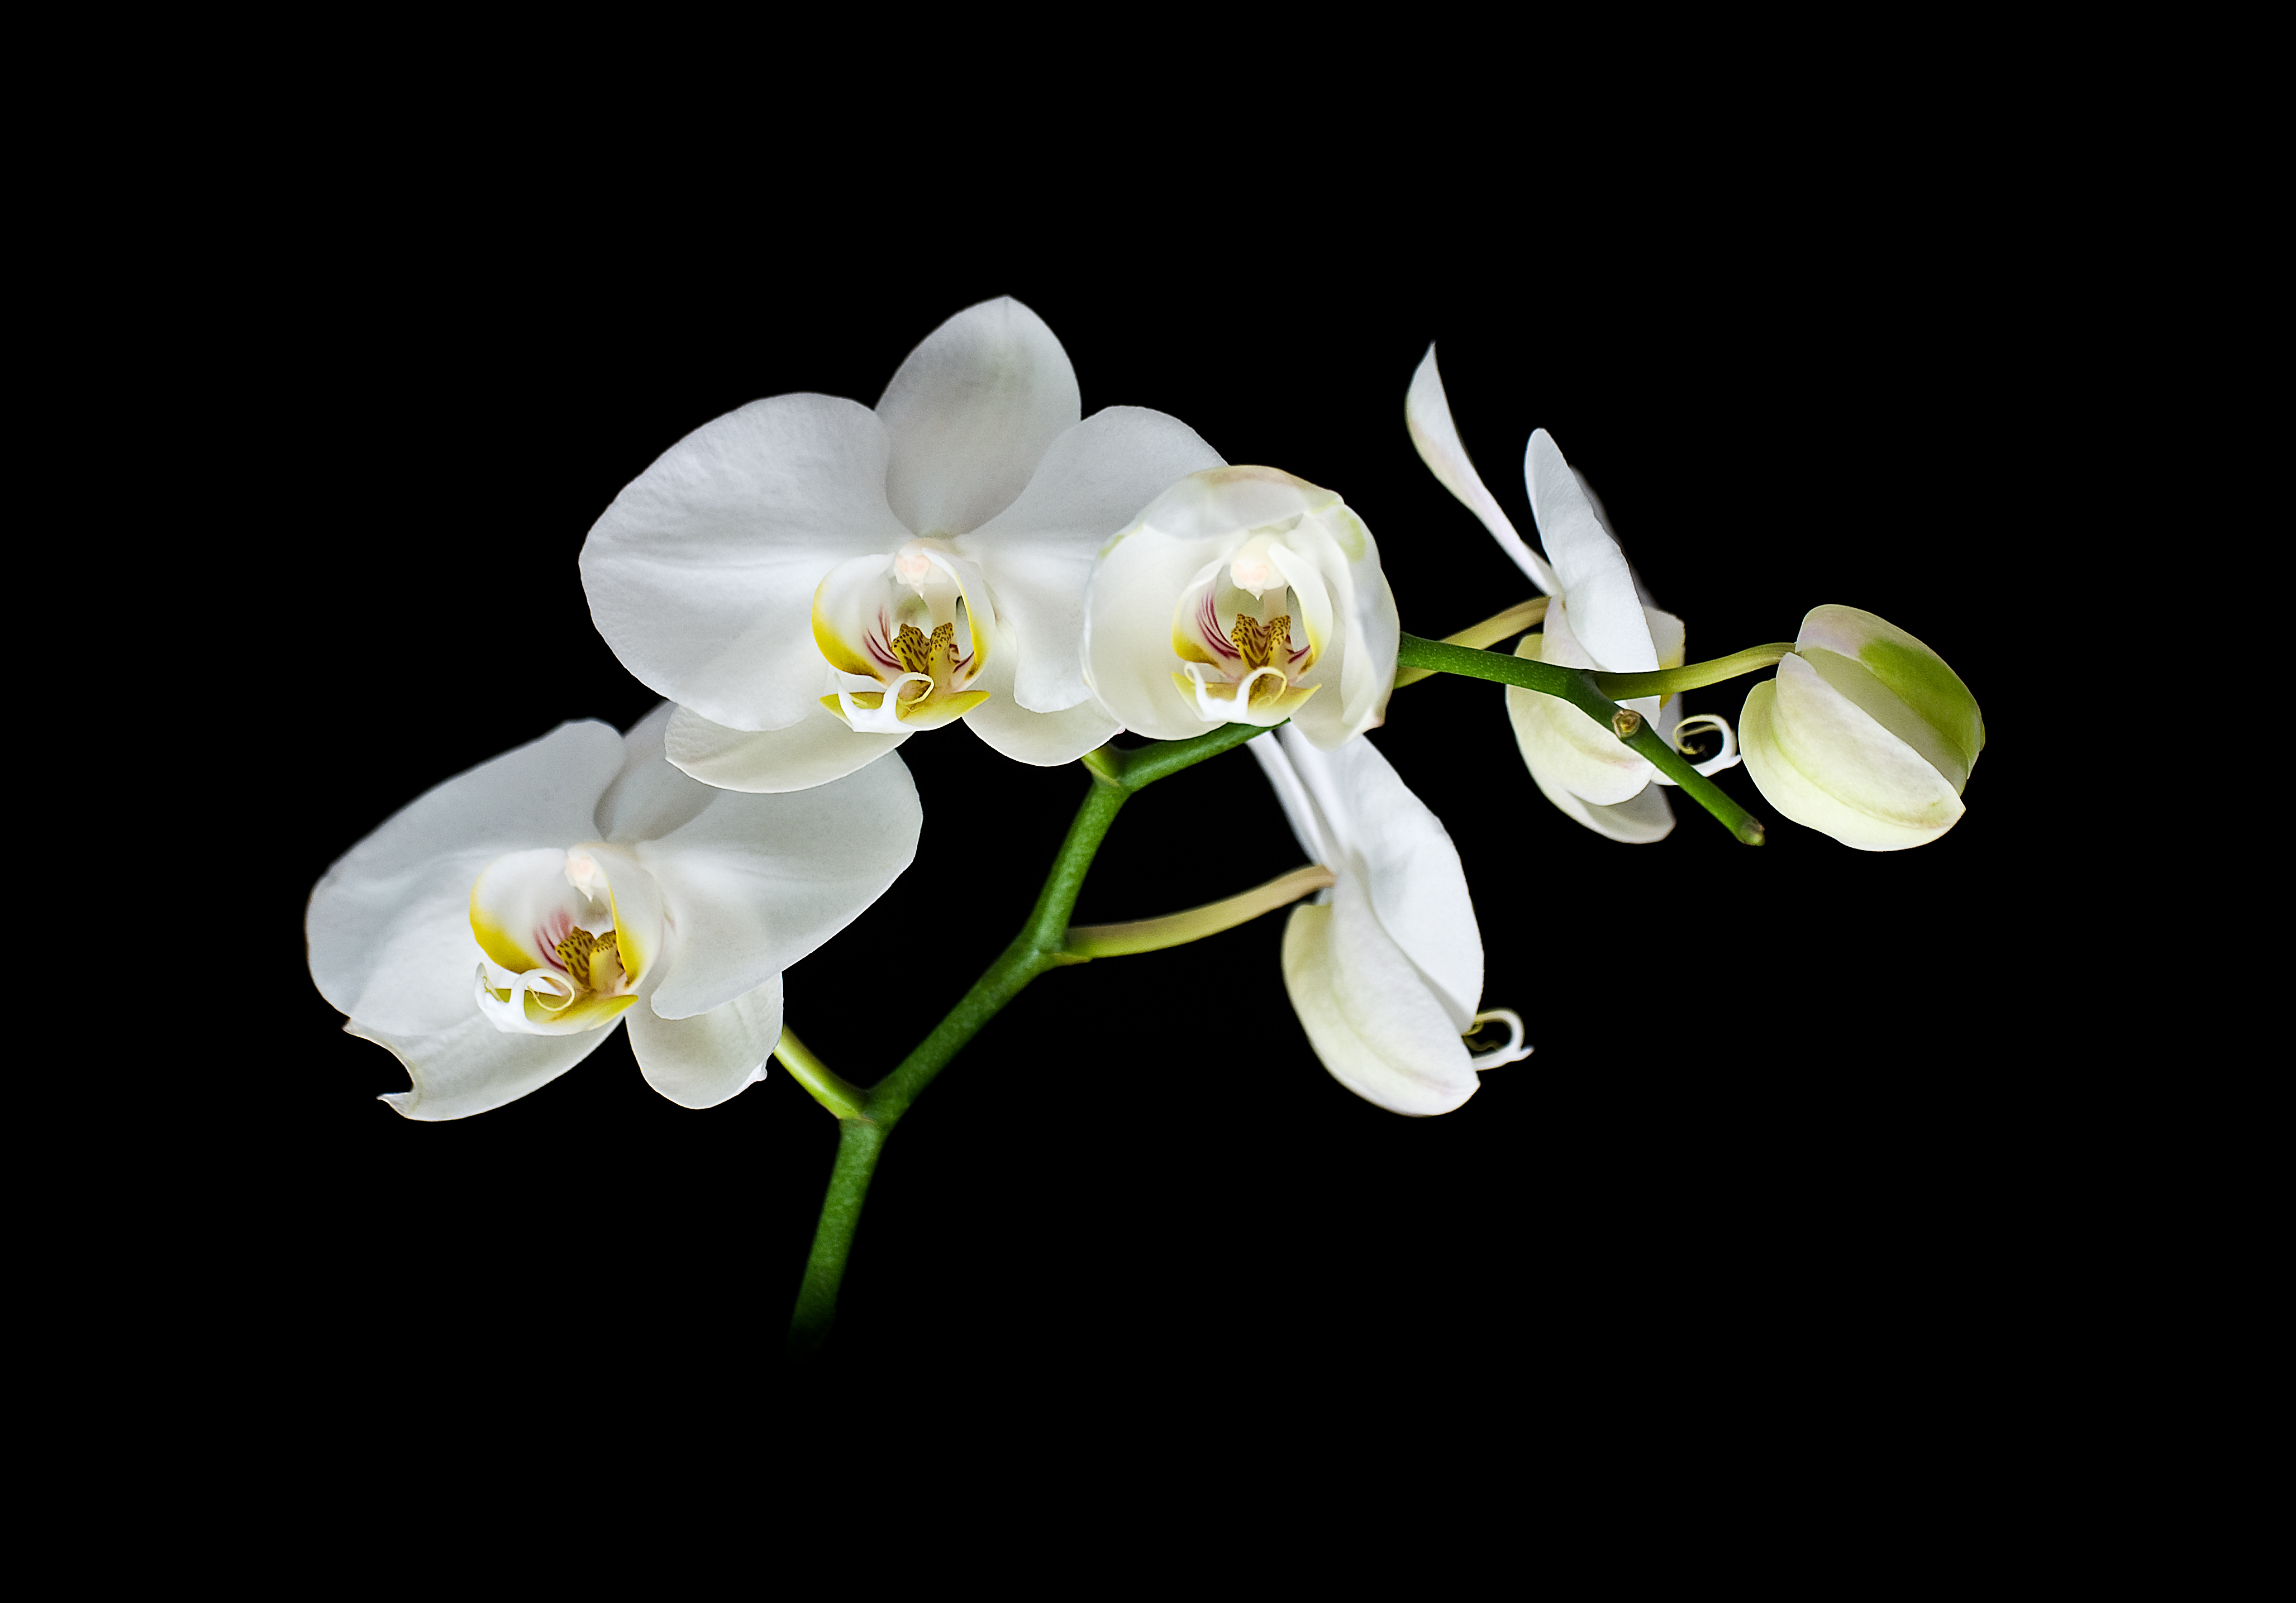 Orchids Wallpaper Black And White Jpg